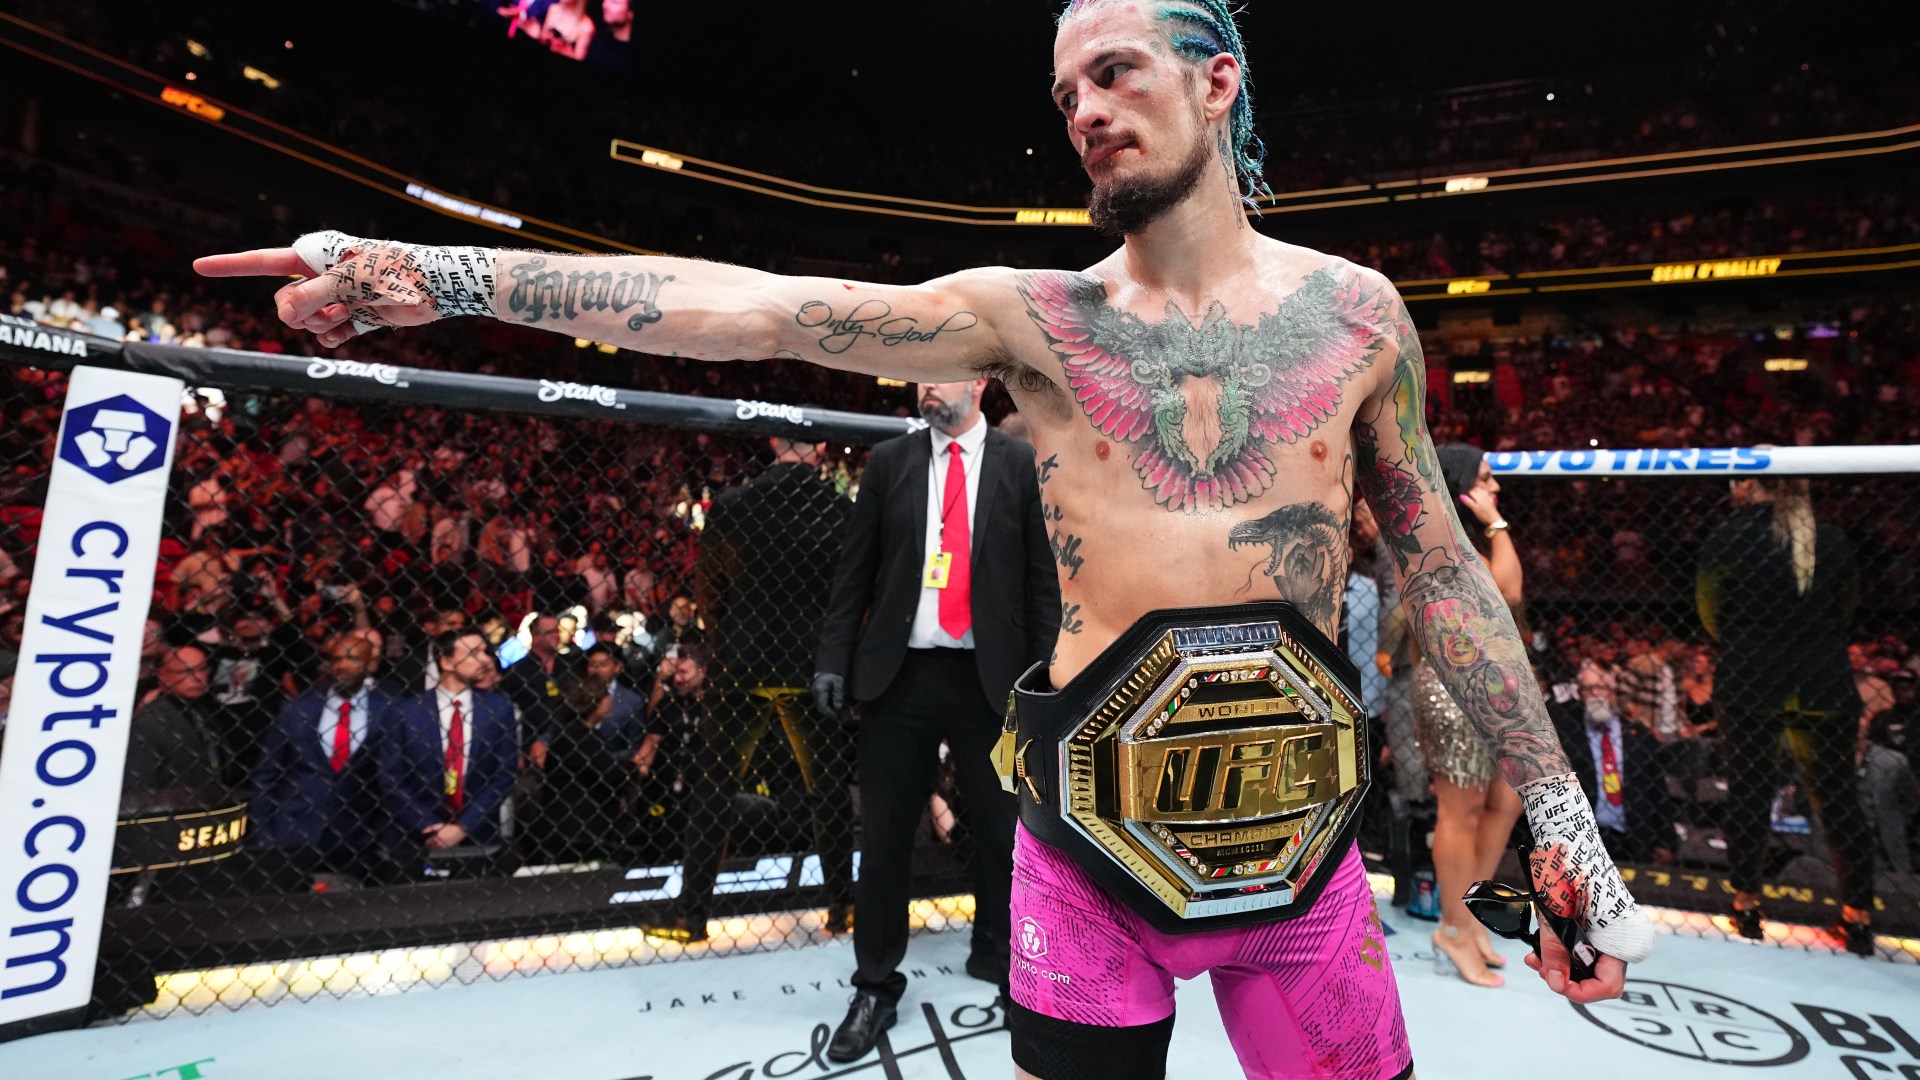 Sean OMalley reveals side hustle makes him THREE TIMES more money than being UFC champion [Video]